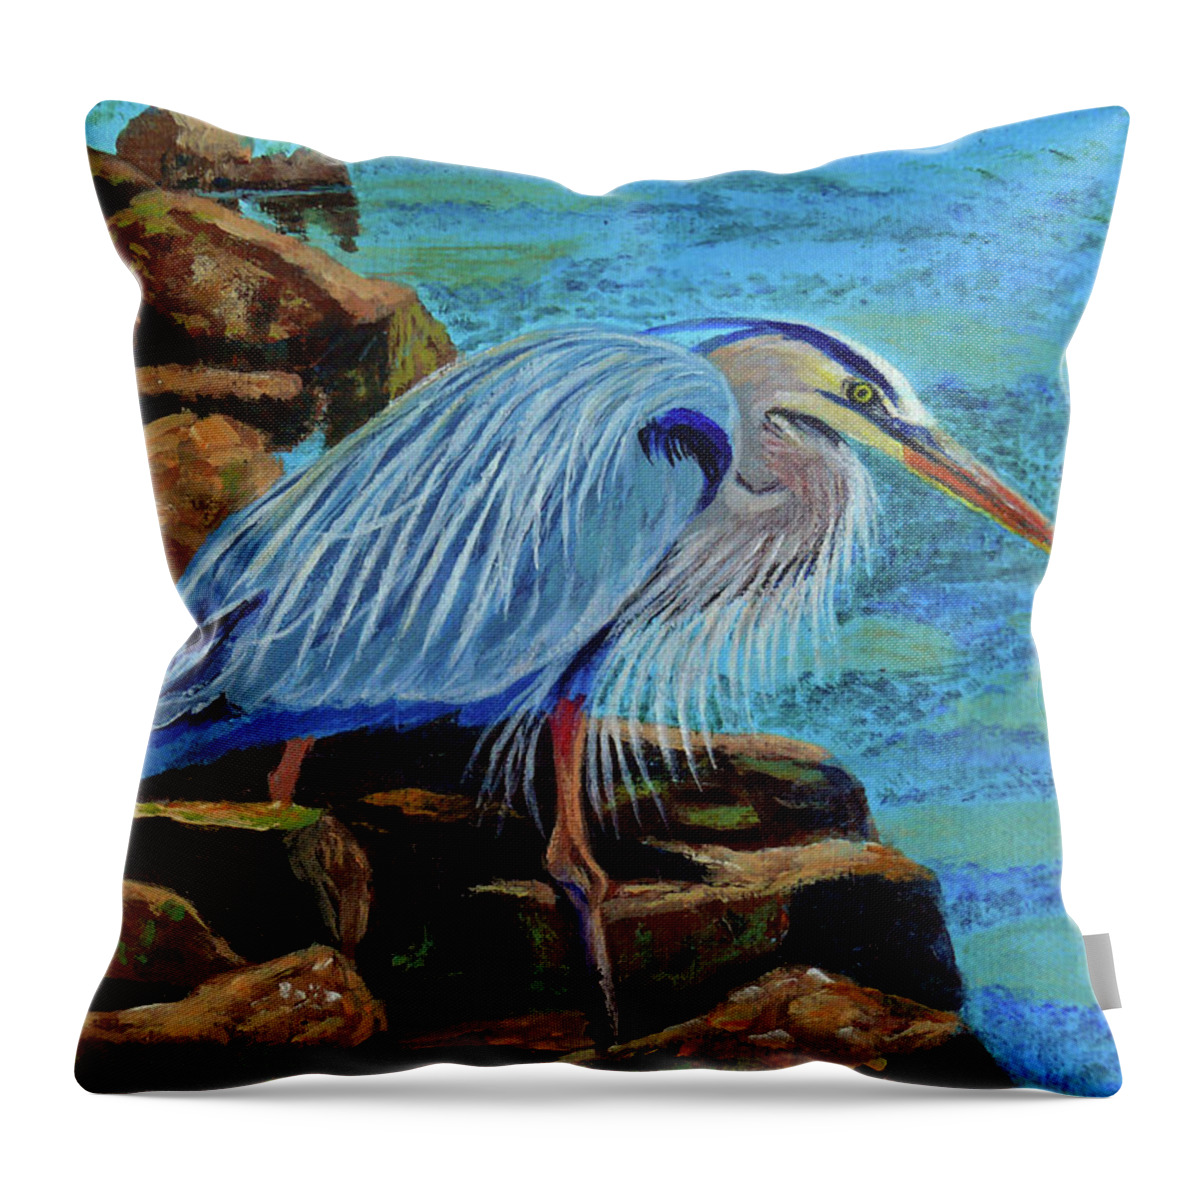 Low Tide Fisherman Throw Pillow featuring the painting Low Tide Fisherman by Susan Duda